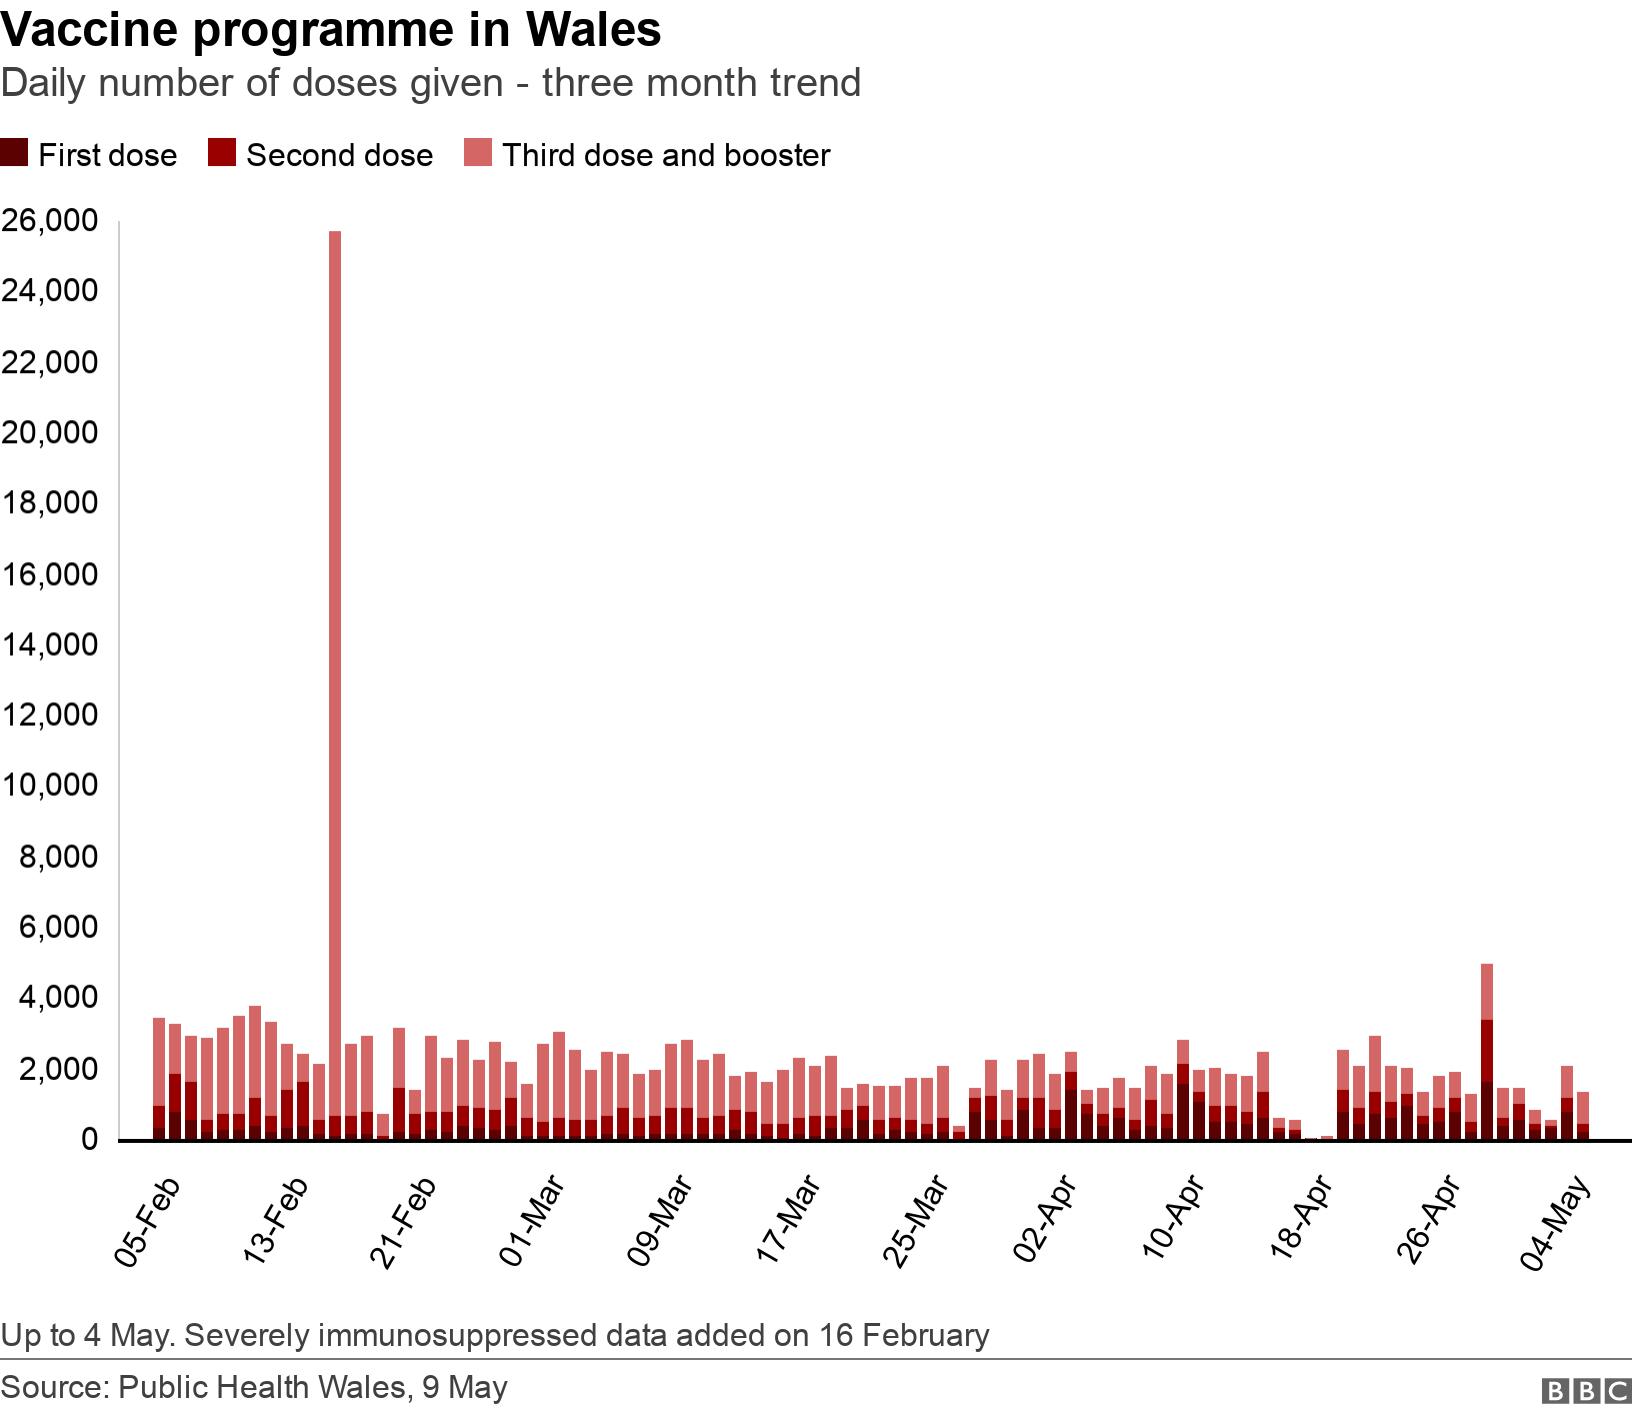 Vaccine programme in Wales. Daily number of doses given - three month trend.  Up to 4 May. Severely immunosuppressed data added on 16 February.